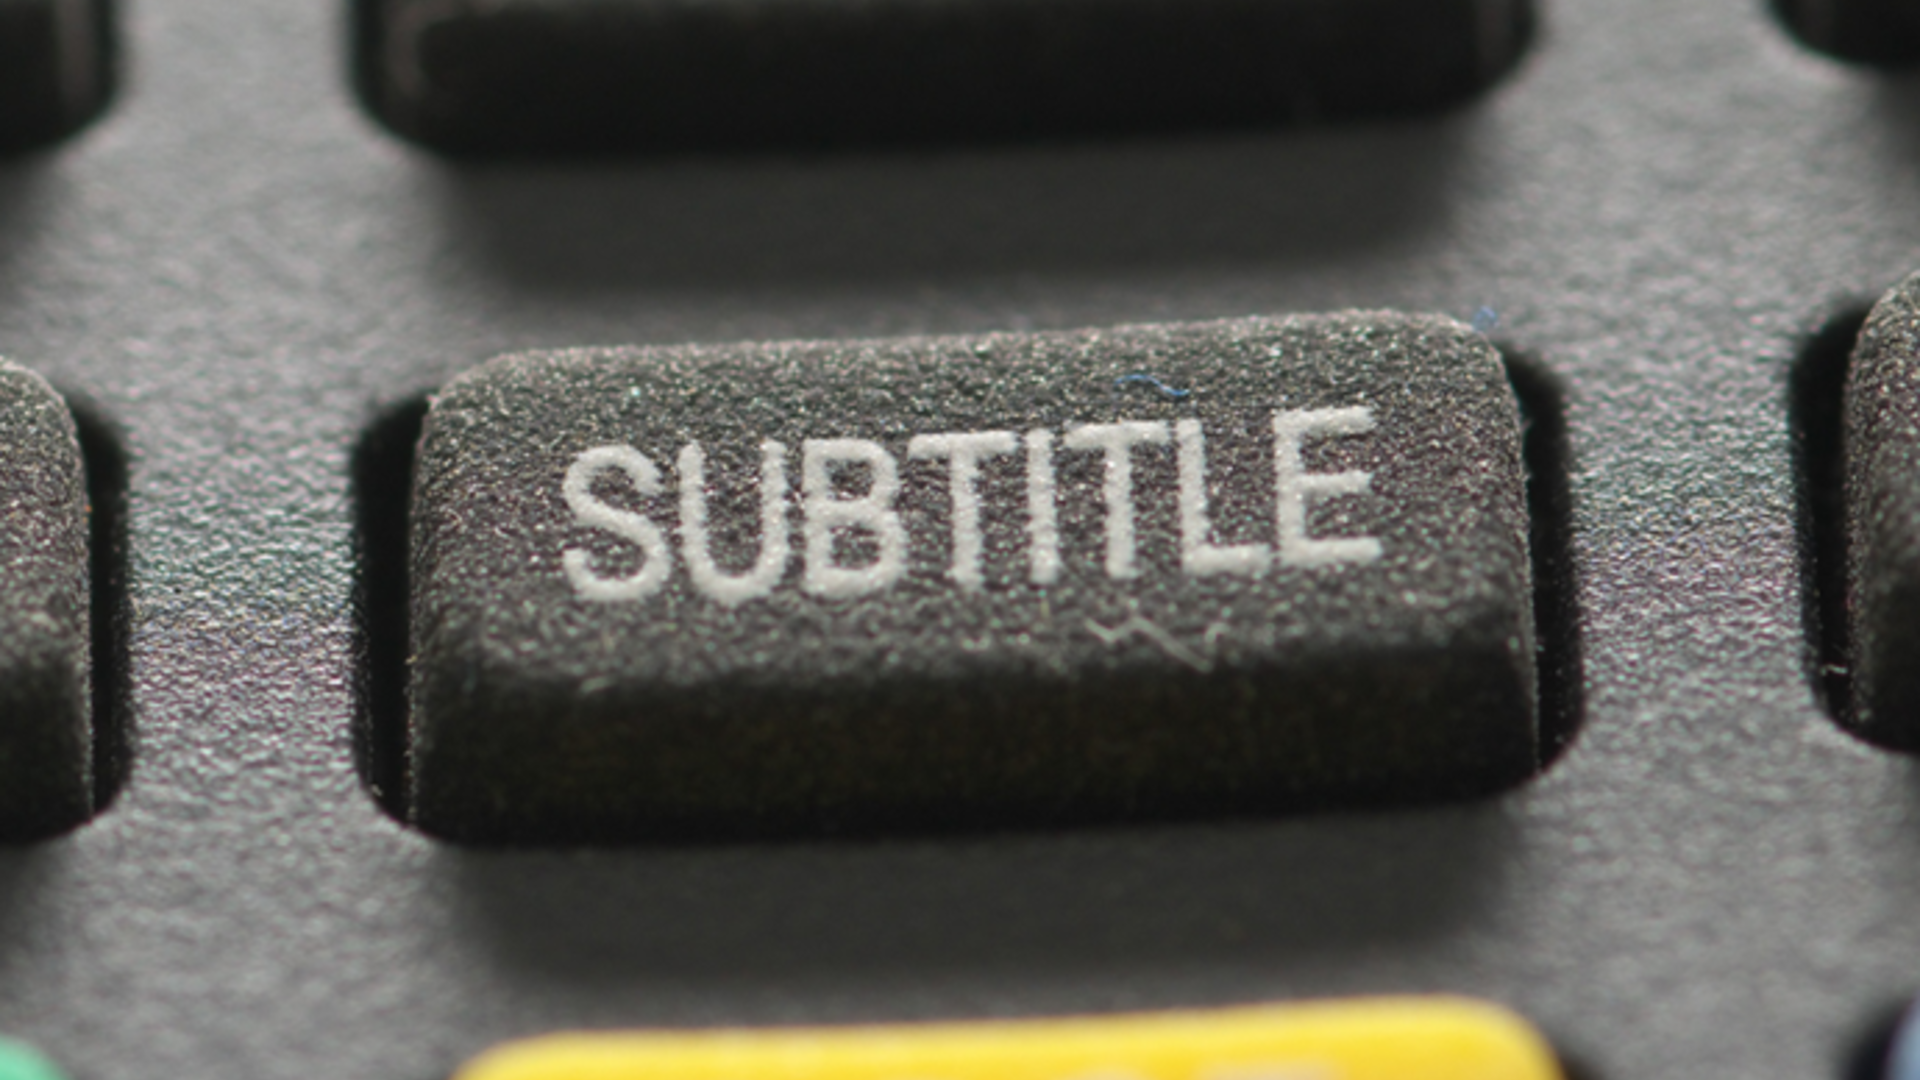 Frequently Asked Questions About Subtitle Translation